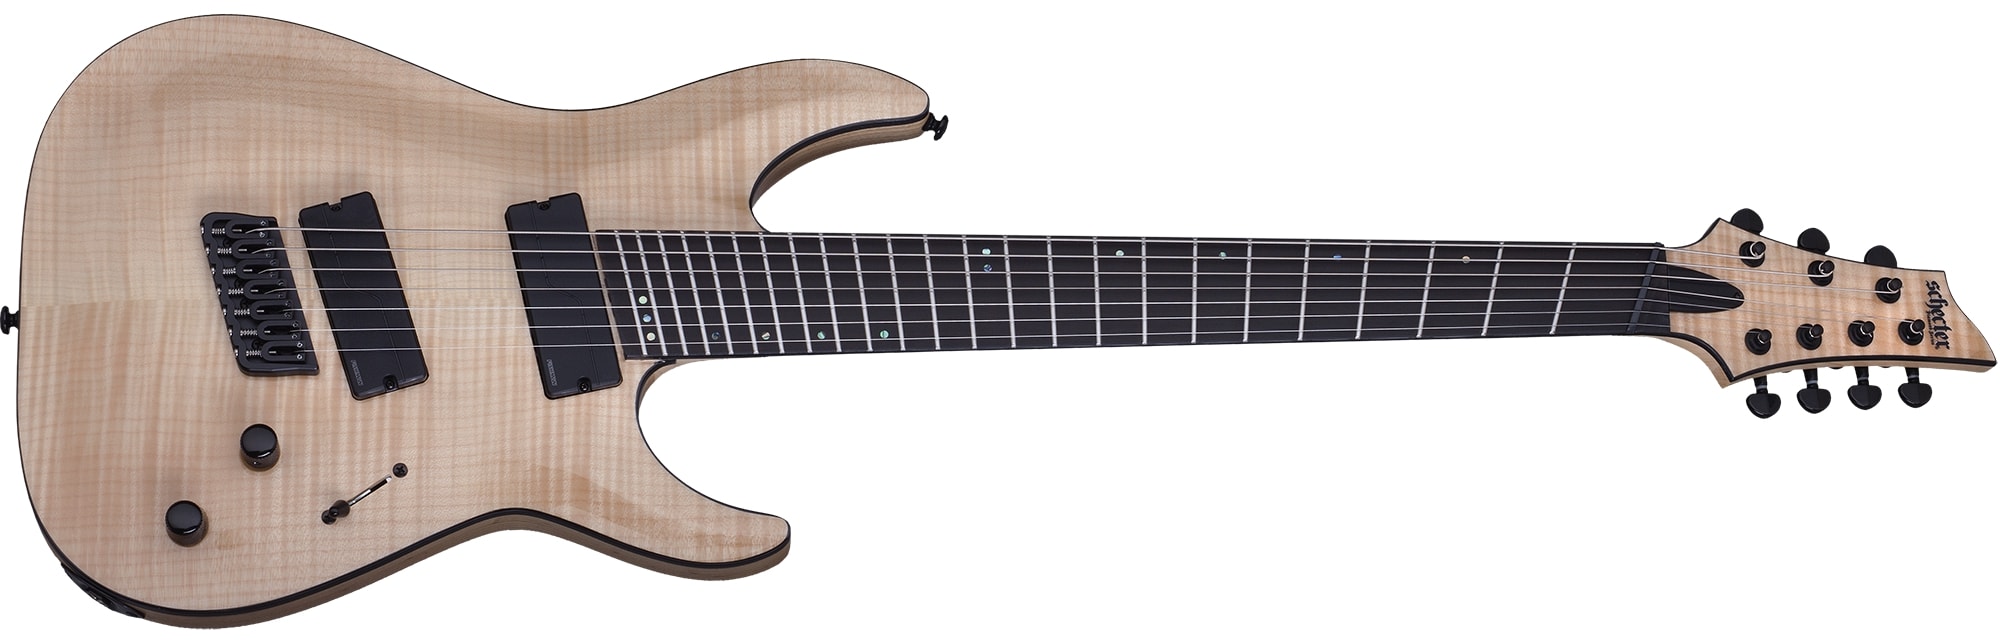 Schecter 7 String Solid-Body Electric Guitar Elite Multi-Scale in Gloss Natural 1366-SHC - The Guitar World